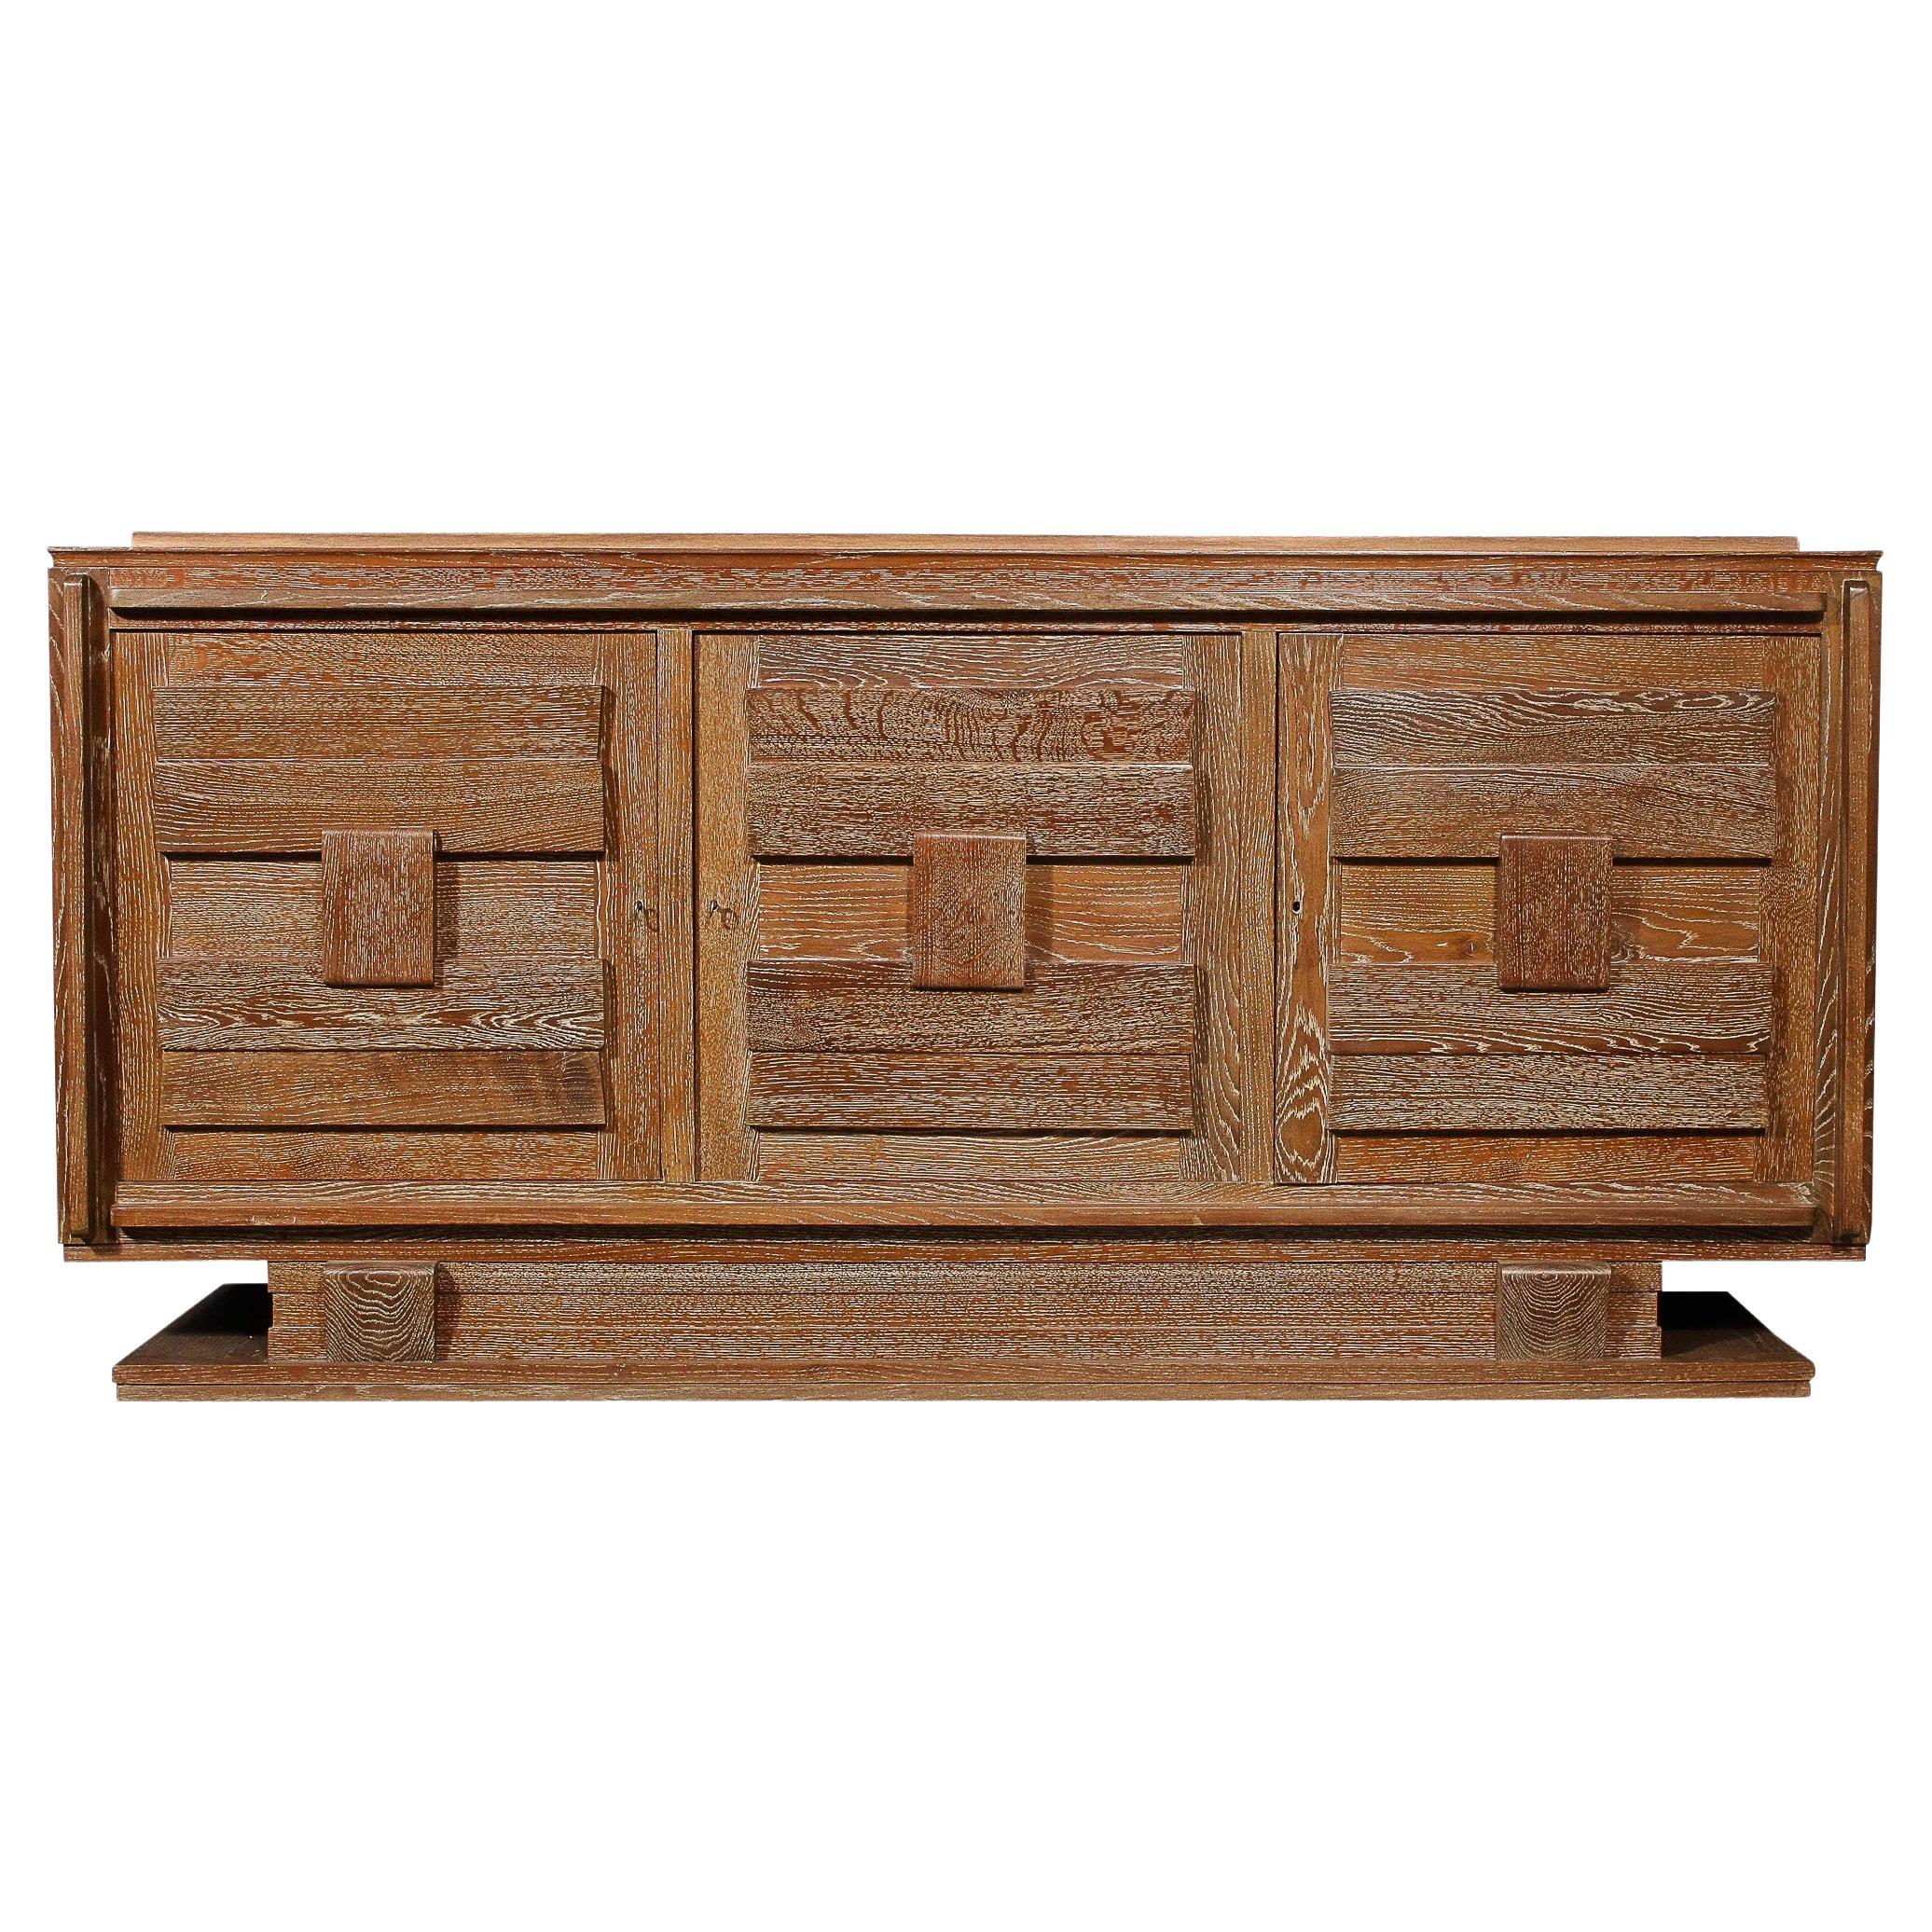 1950s French Mid-Century Modern Geometric Limed Oak Cabinet with Plinth Base